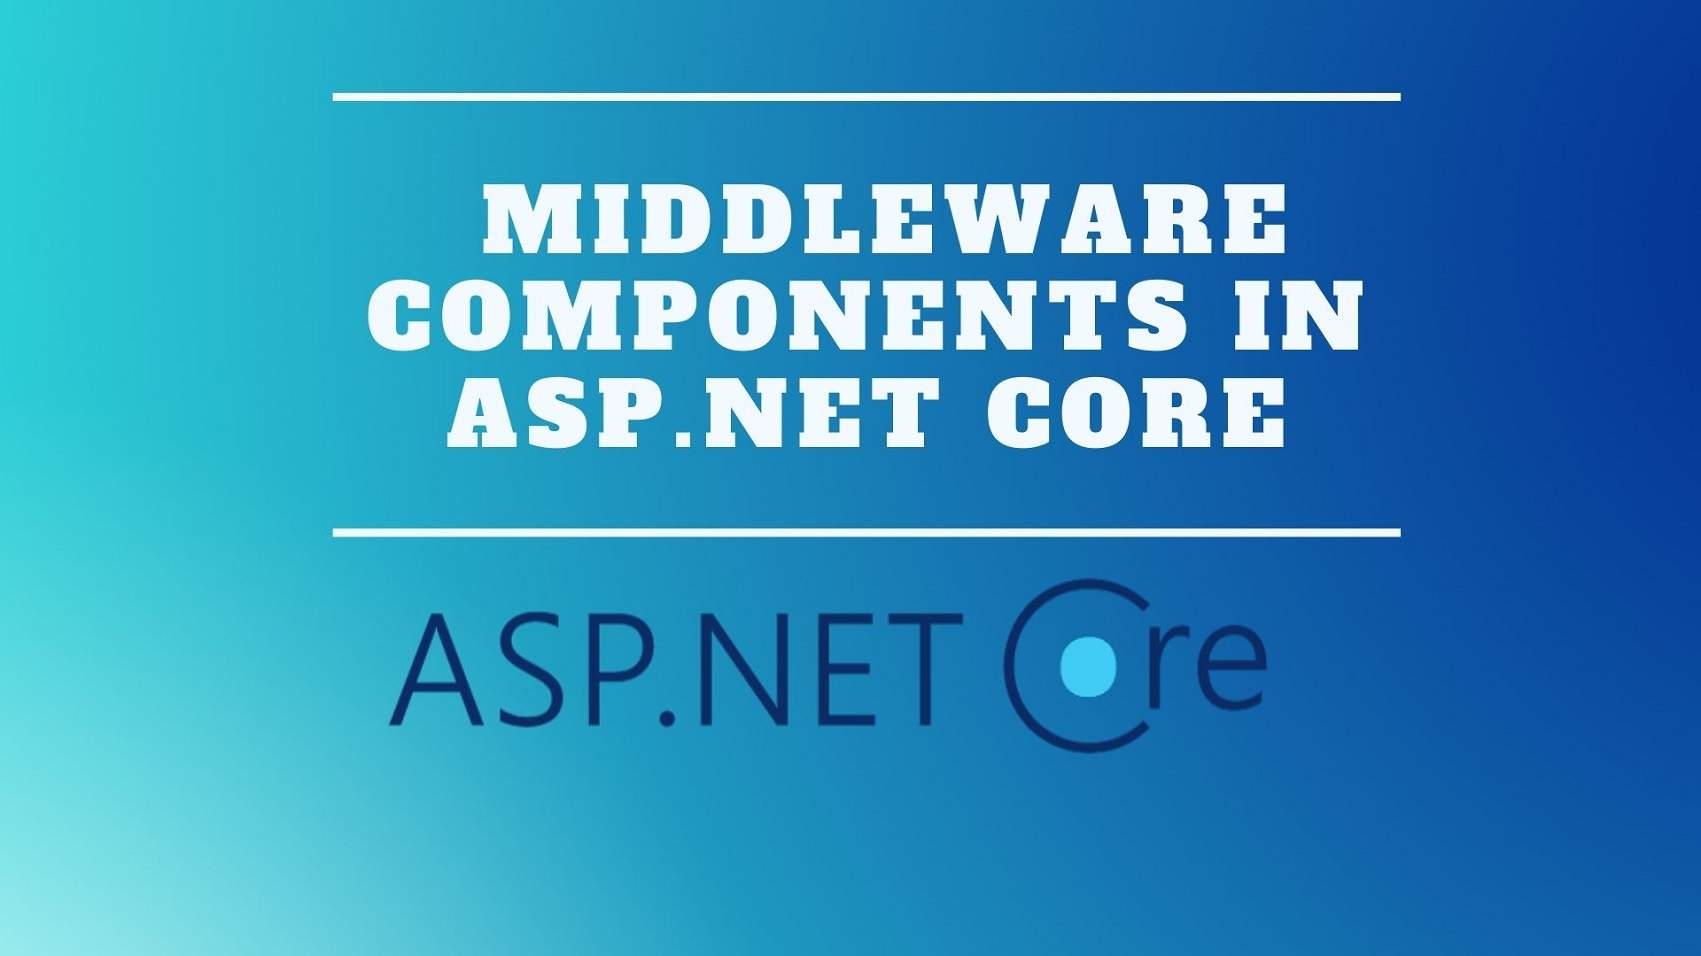 Middleware Components And Request Pipeline in ASP.NET Core